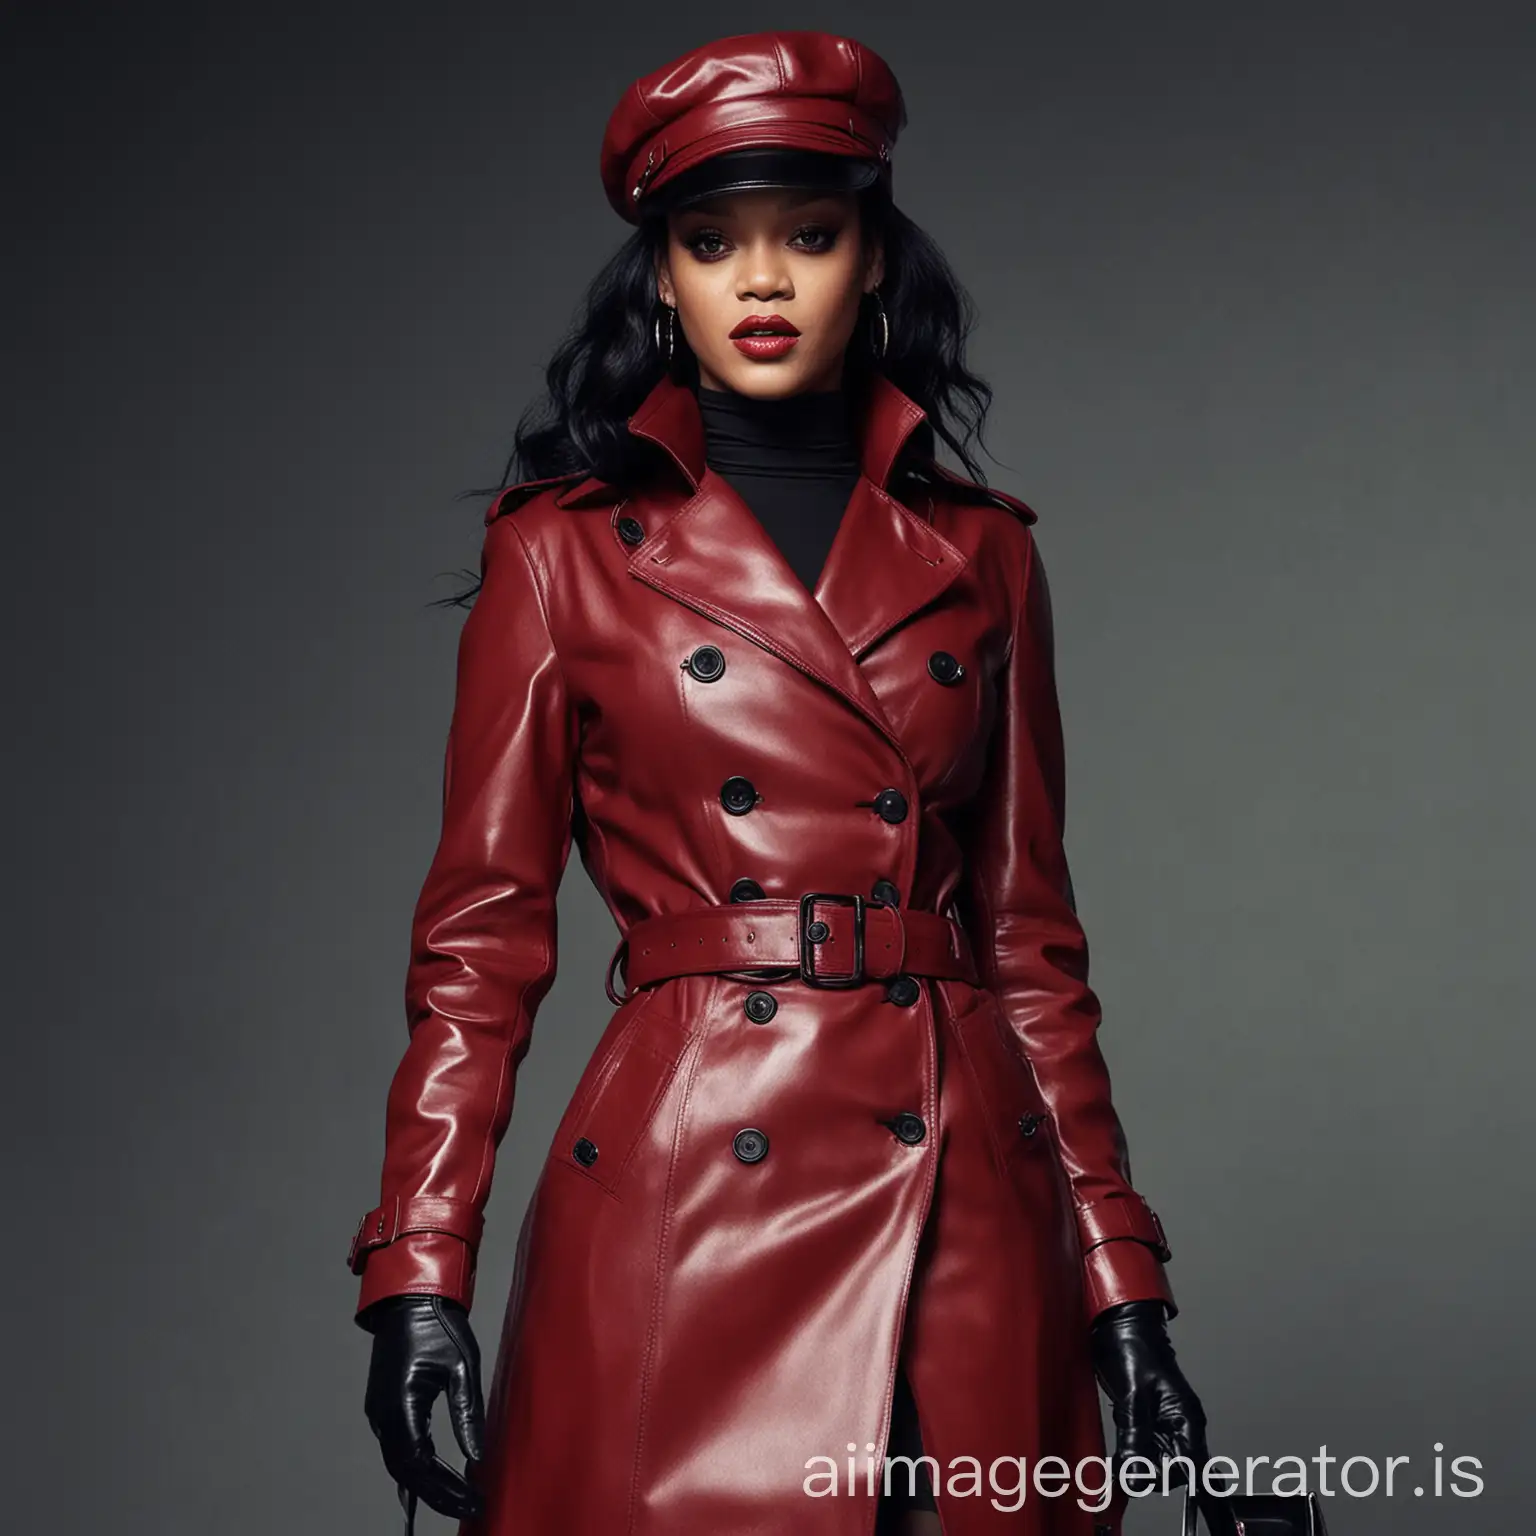 Rihanna-in-Sultry-Red-Leather-Trench-Coat-and-Black-Leather-Accessories